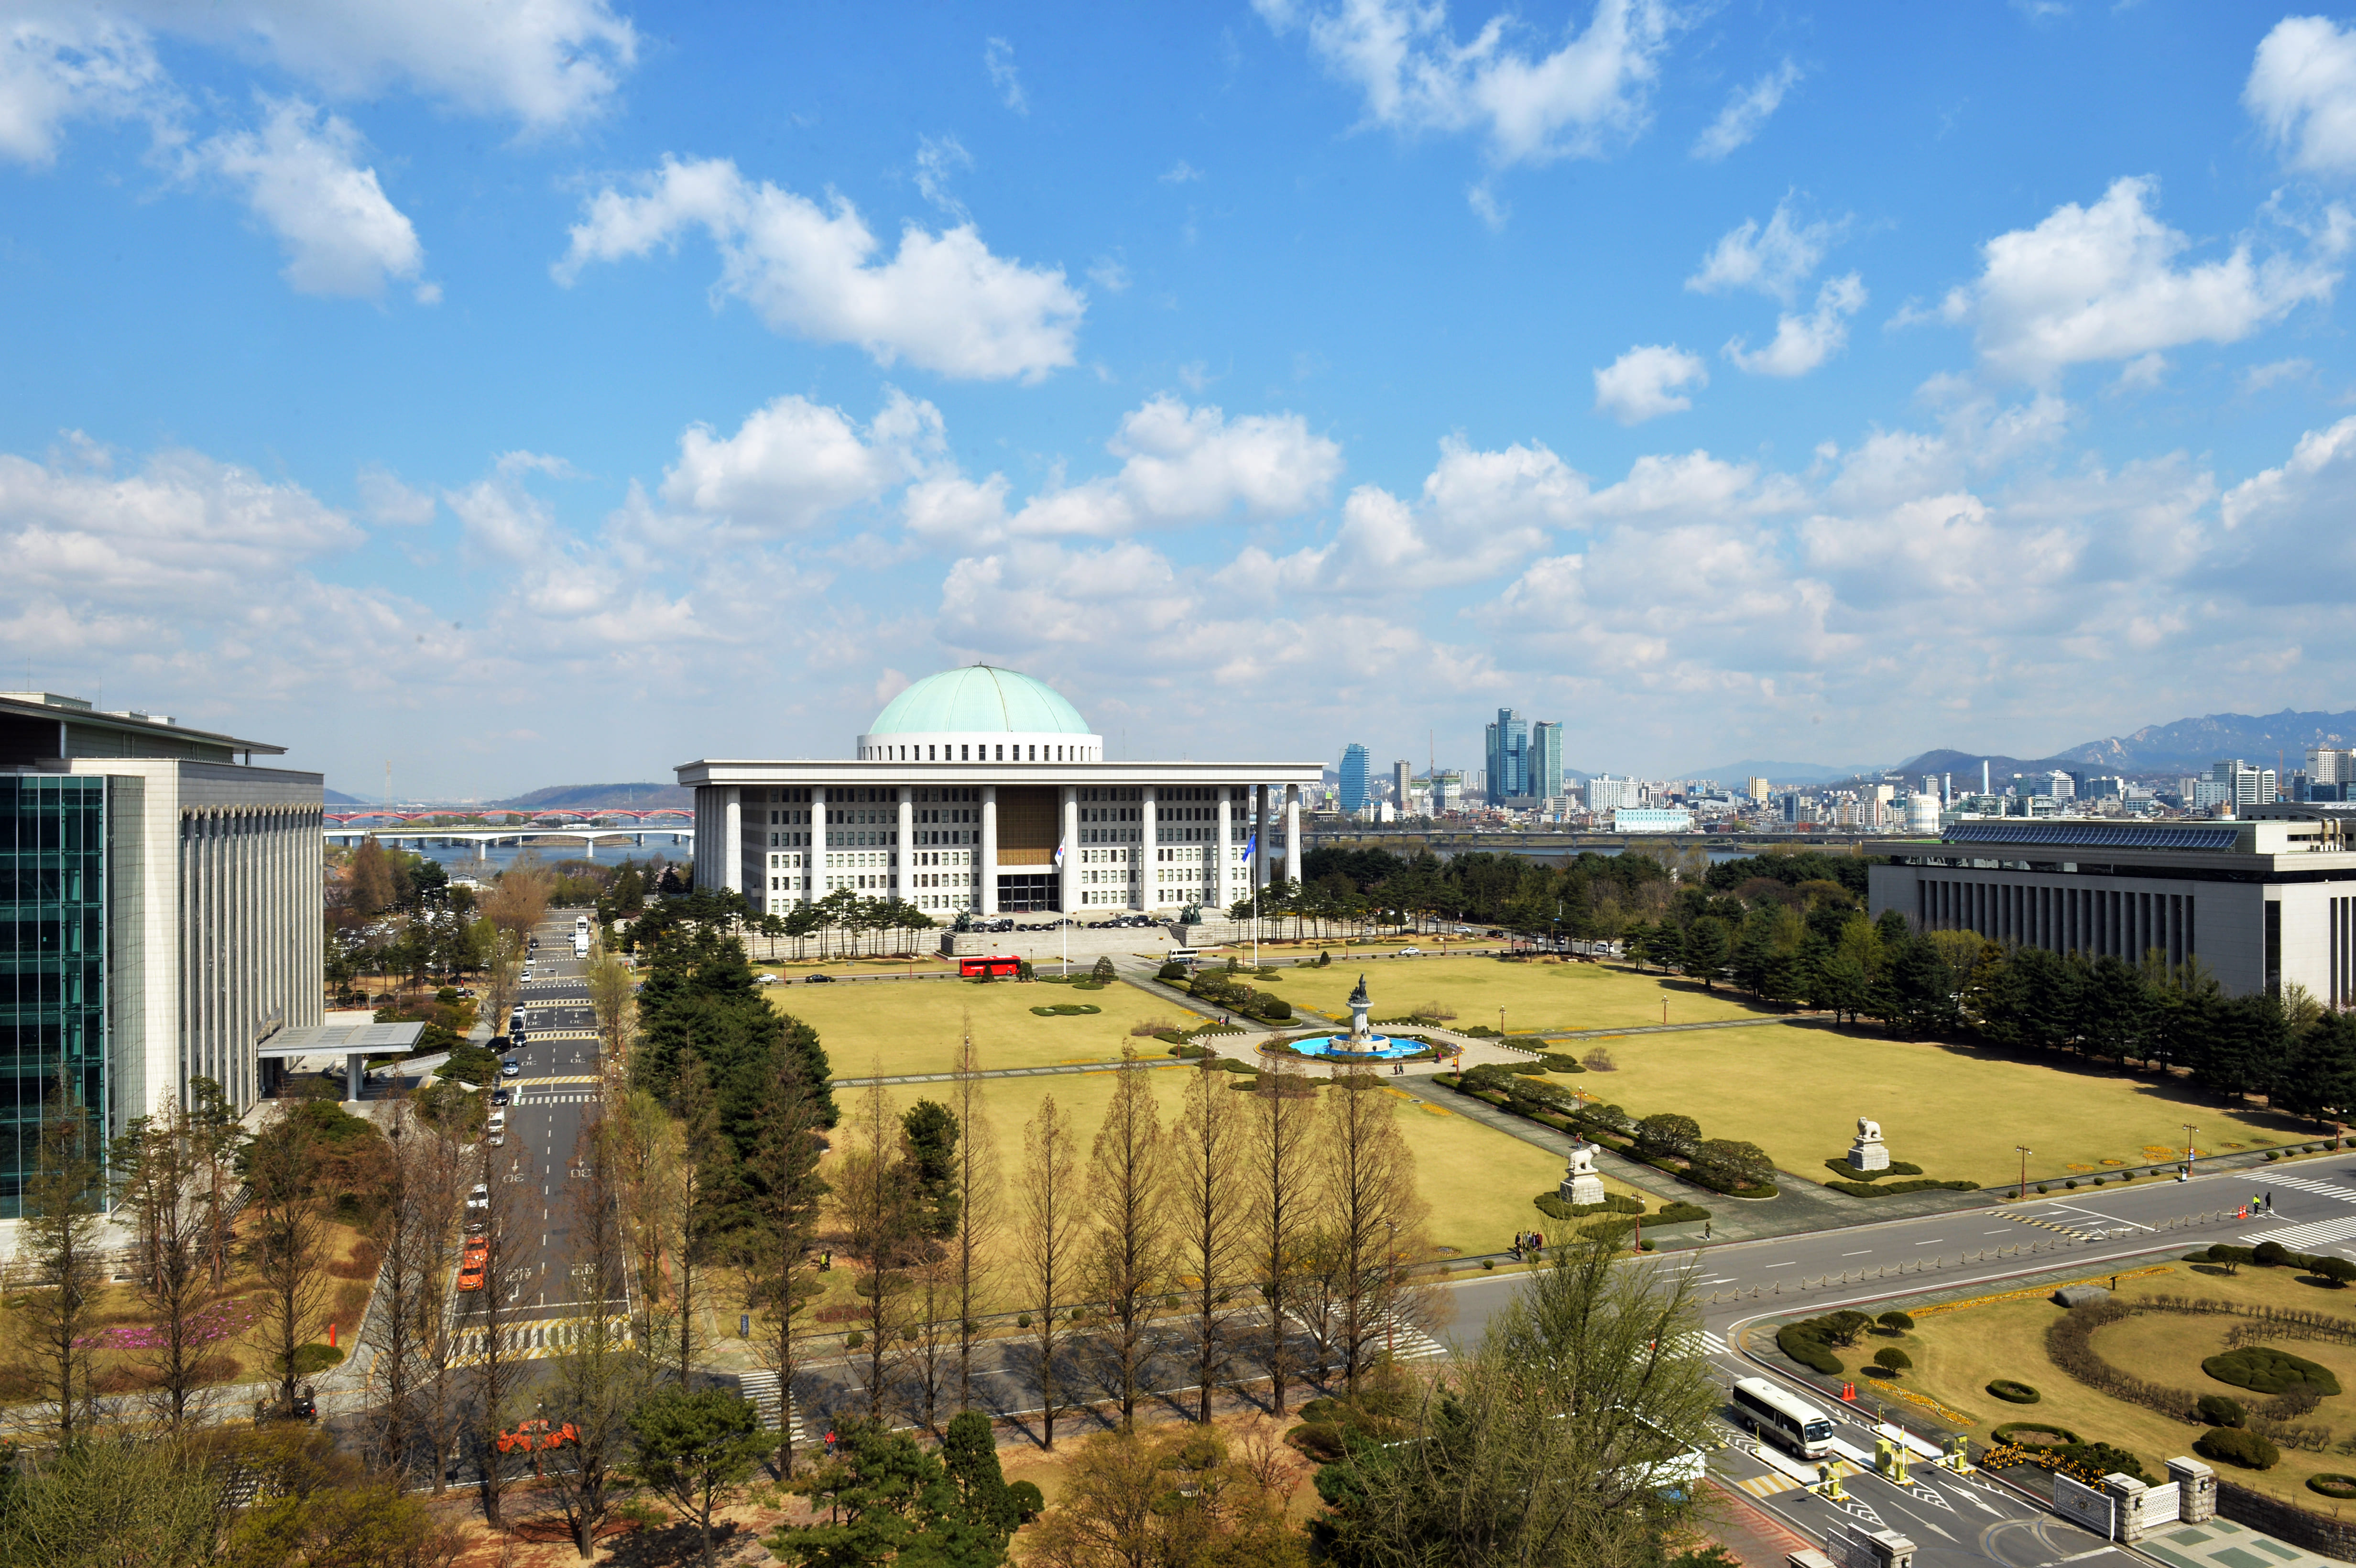 View of the National Assembly Building 관련사진 4 보기